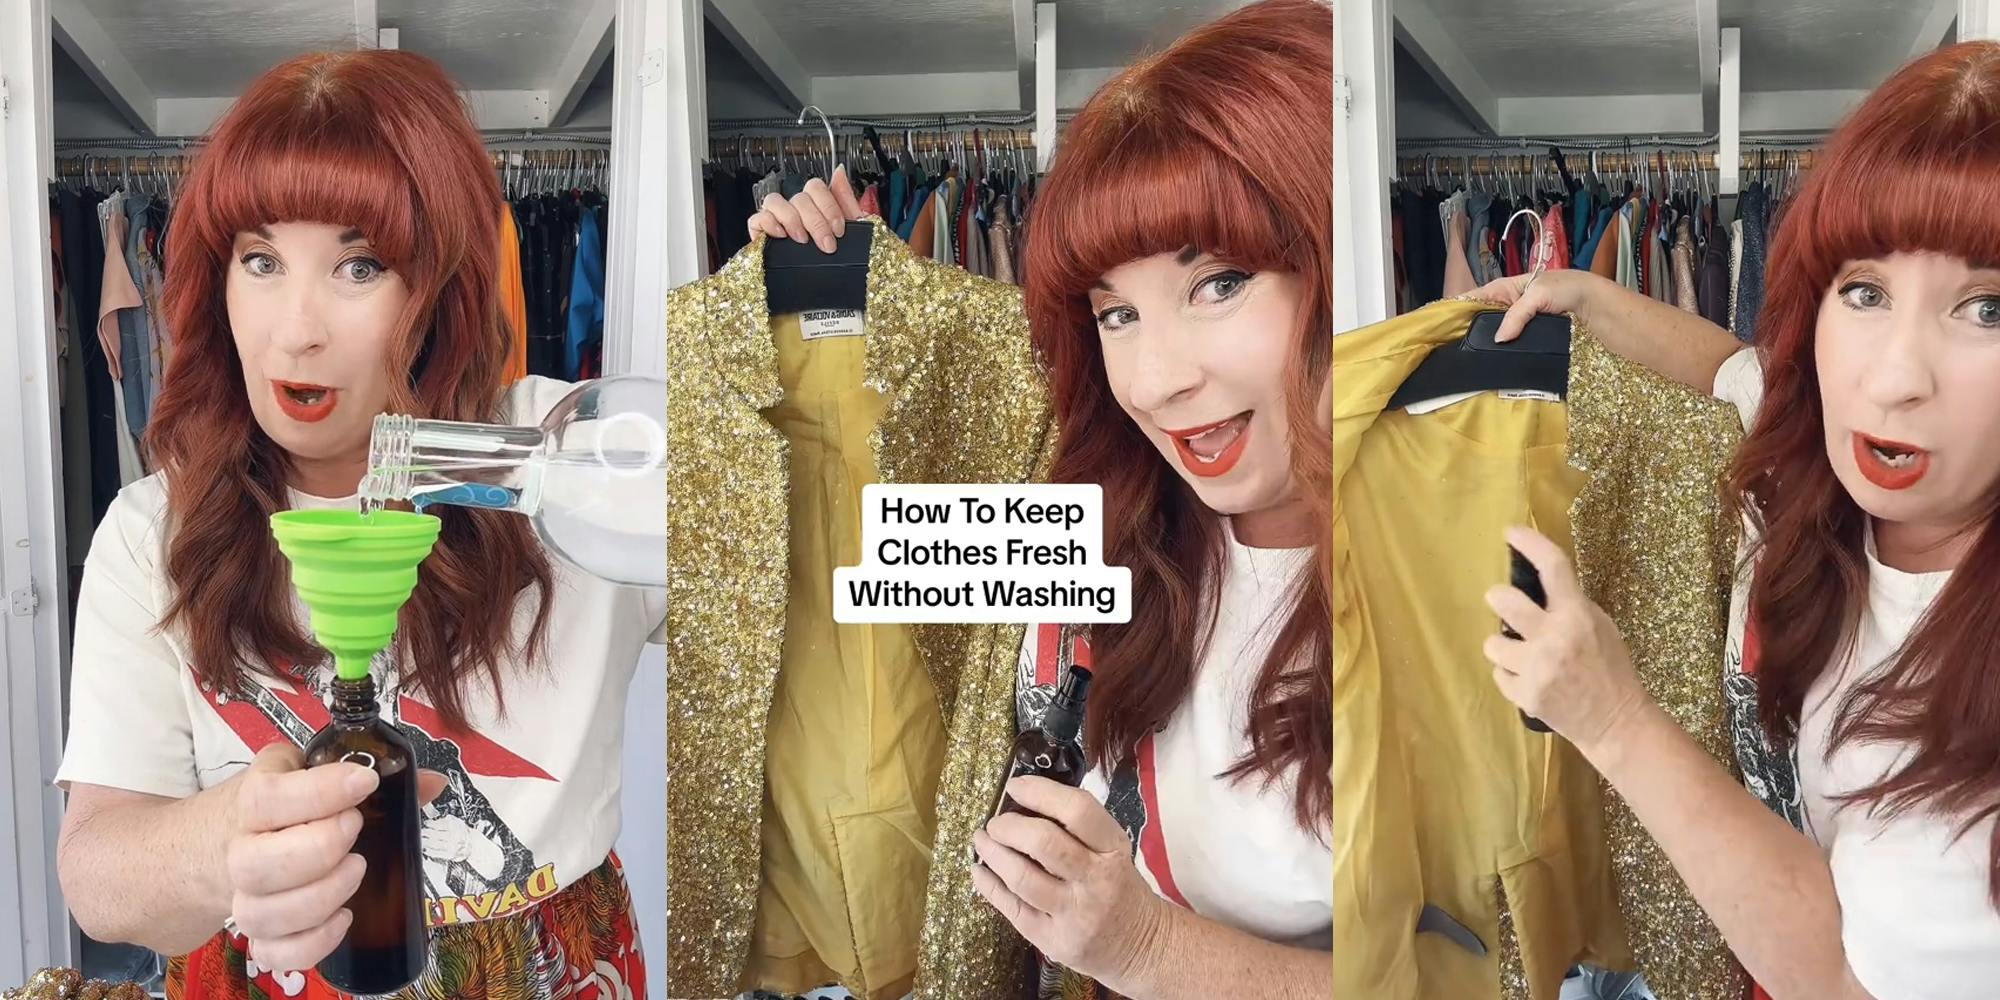 woman speaking in dressing room pouring vodka into spray bottle (l) woman speaking in dressing room with caption "How To Keep Clothes Fresh Without Washing" (c) woman speaking in dressing room spraying inside of jacket (r)